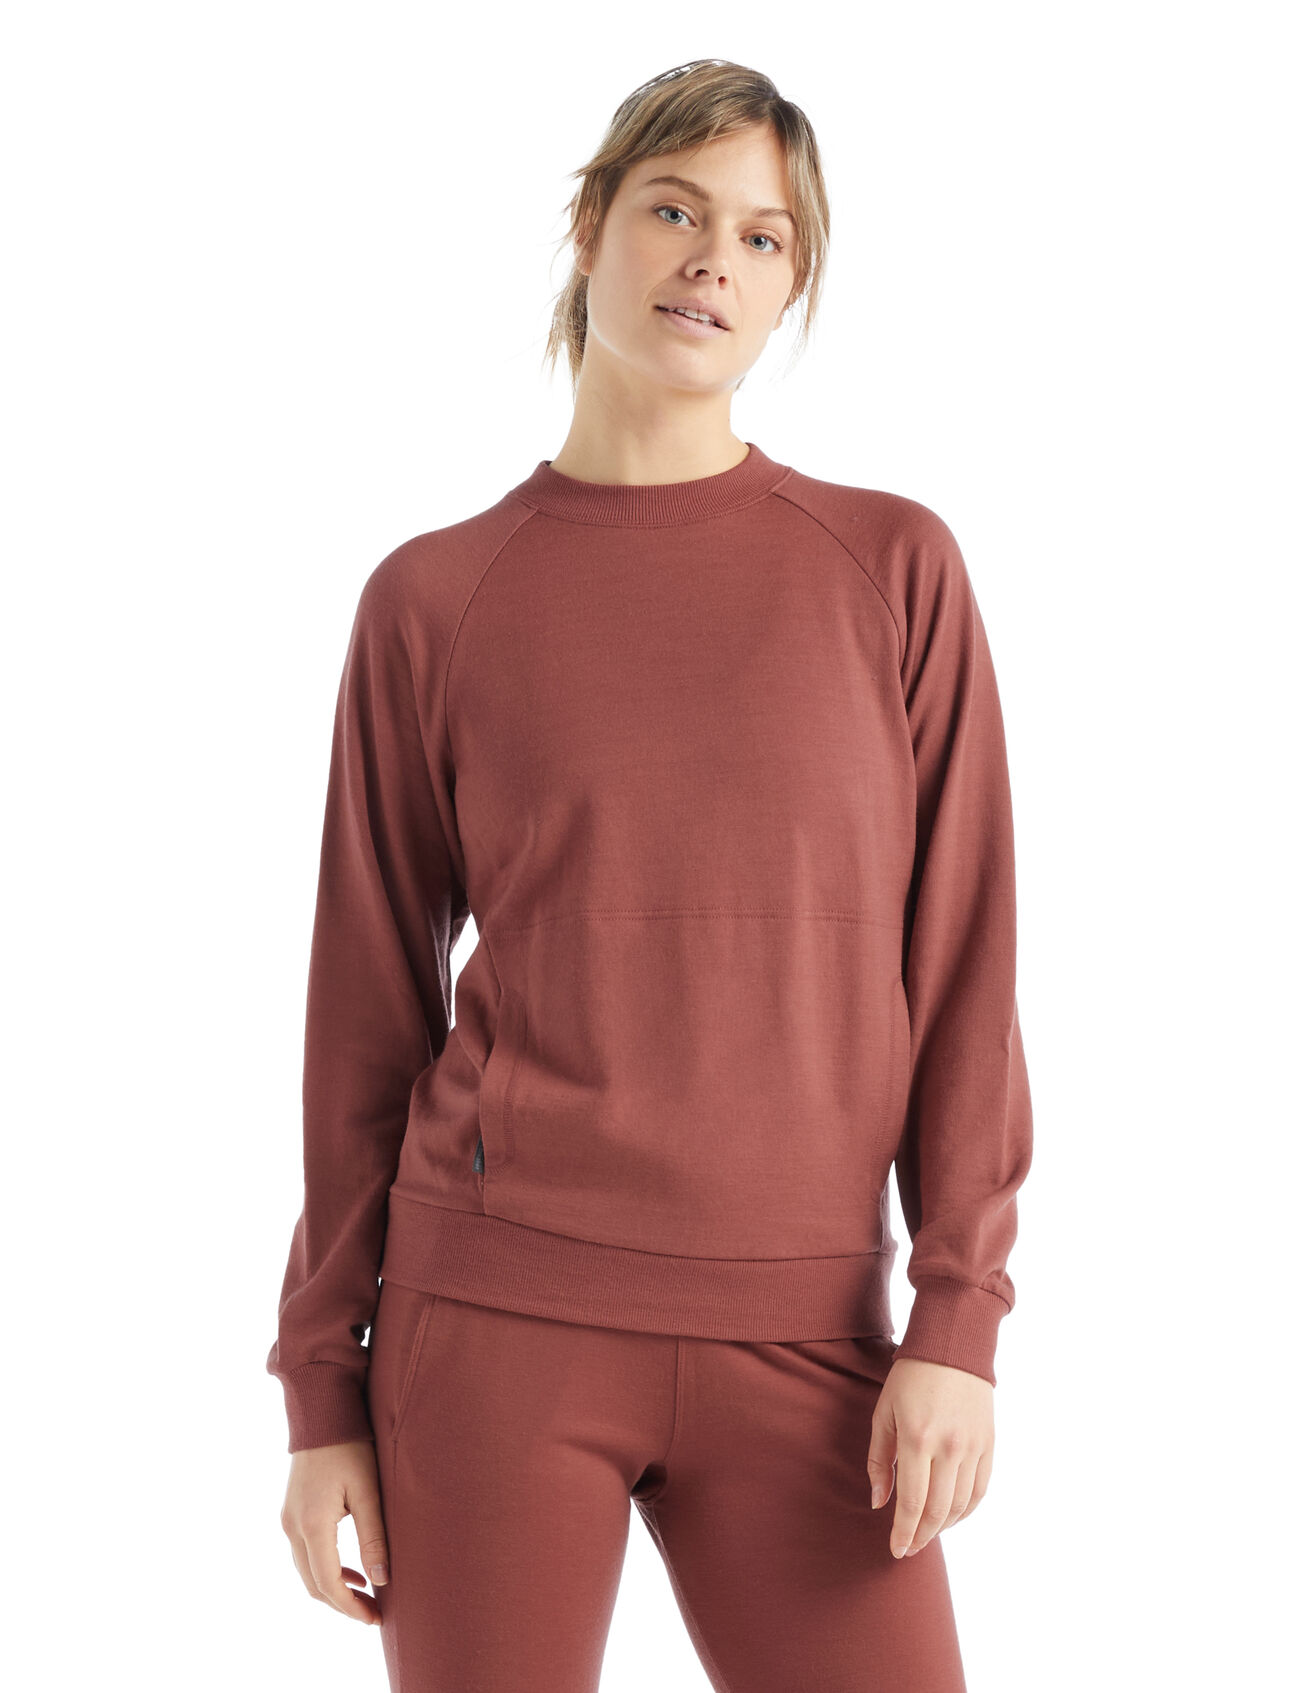 Womens Merino Helliers Terry Long Sleeve Sweatshirt  A classic, everyday sweatshirt ideal for cool-weather layering, the Helliers Terry Long Sleeve Sweatshirt features 100% merino wool terry fabric for super-soft comfort and natural breathability. 